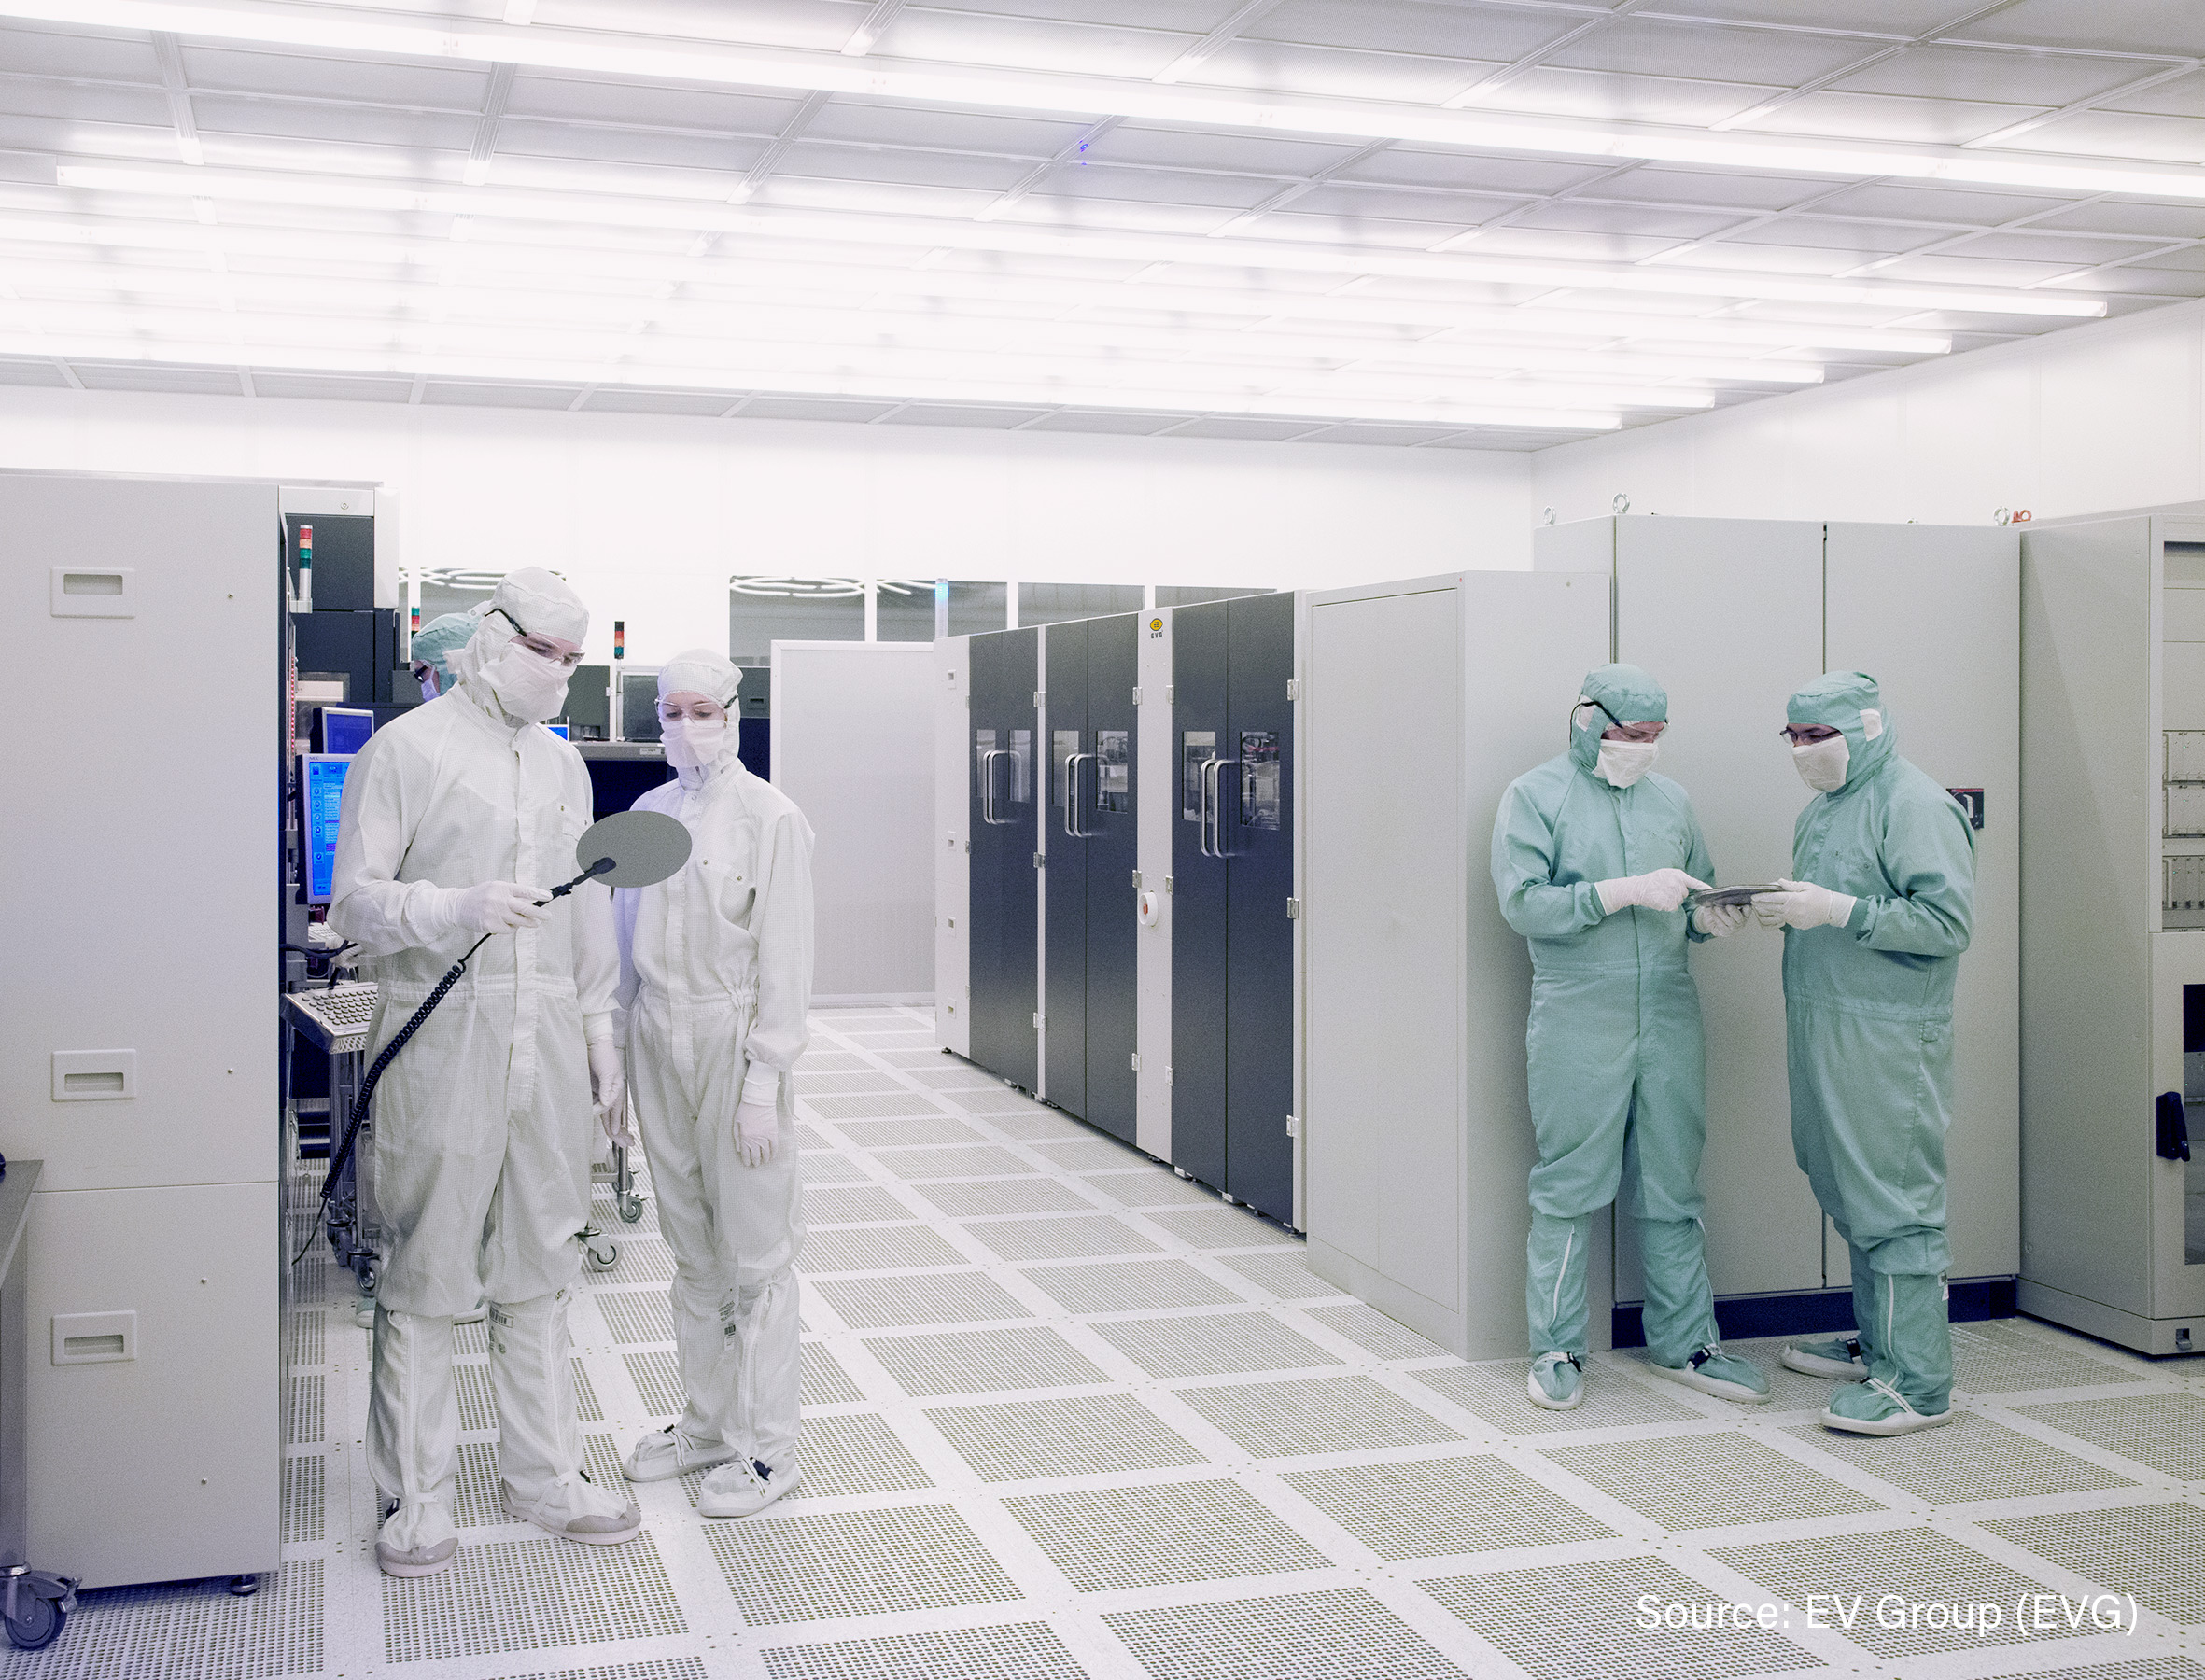 The Heterogeneous Integration Competence Center™ combines EV Group’s world-class wafer bonding, thin-wafer handling, and lithography products and expertise, as well as pilot-line production facilities and services at its state-of-the-art cleanroom facilities.